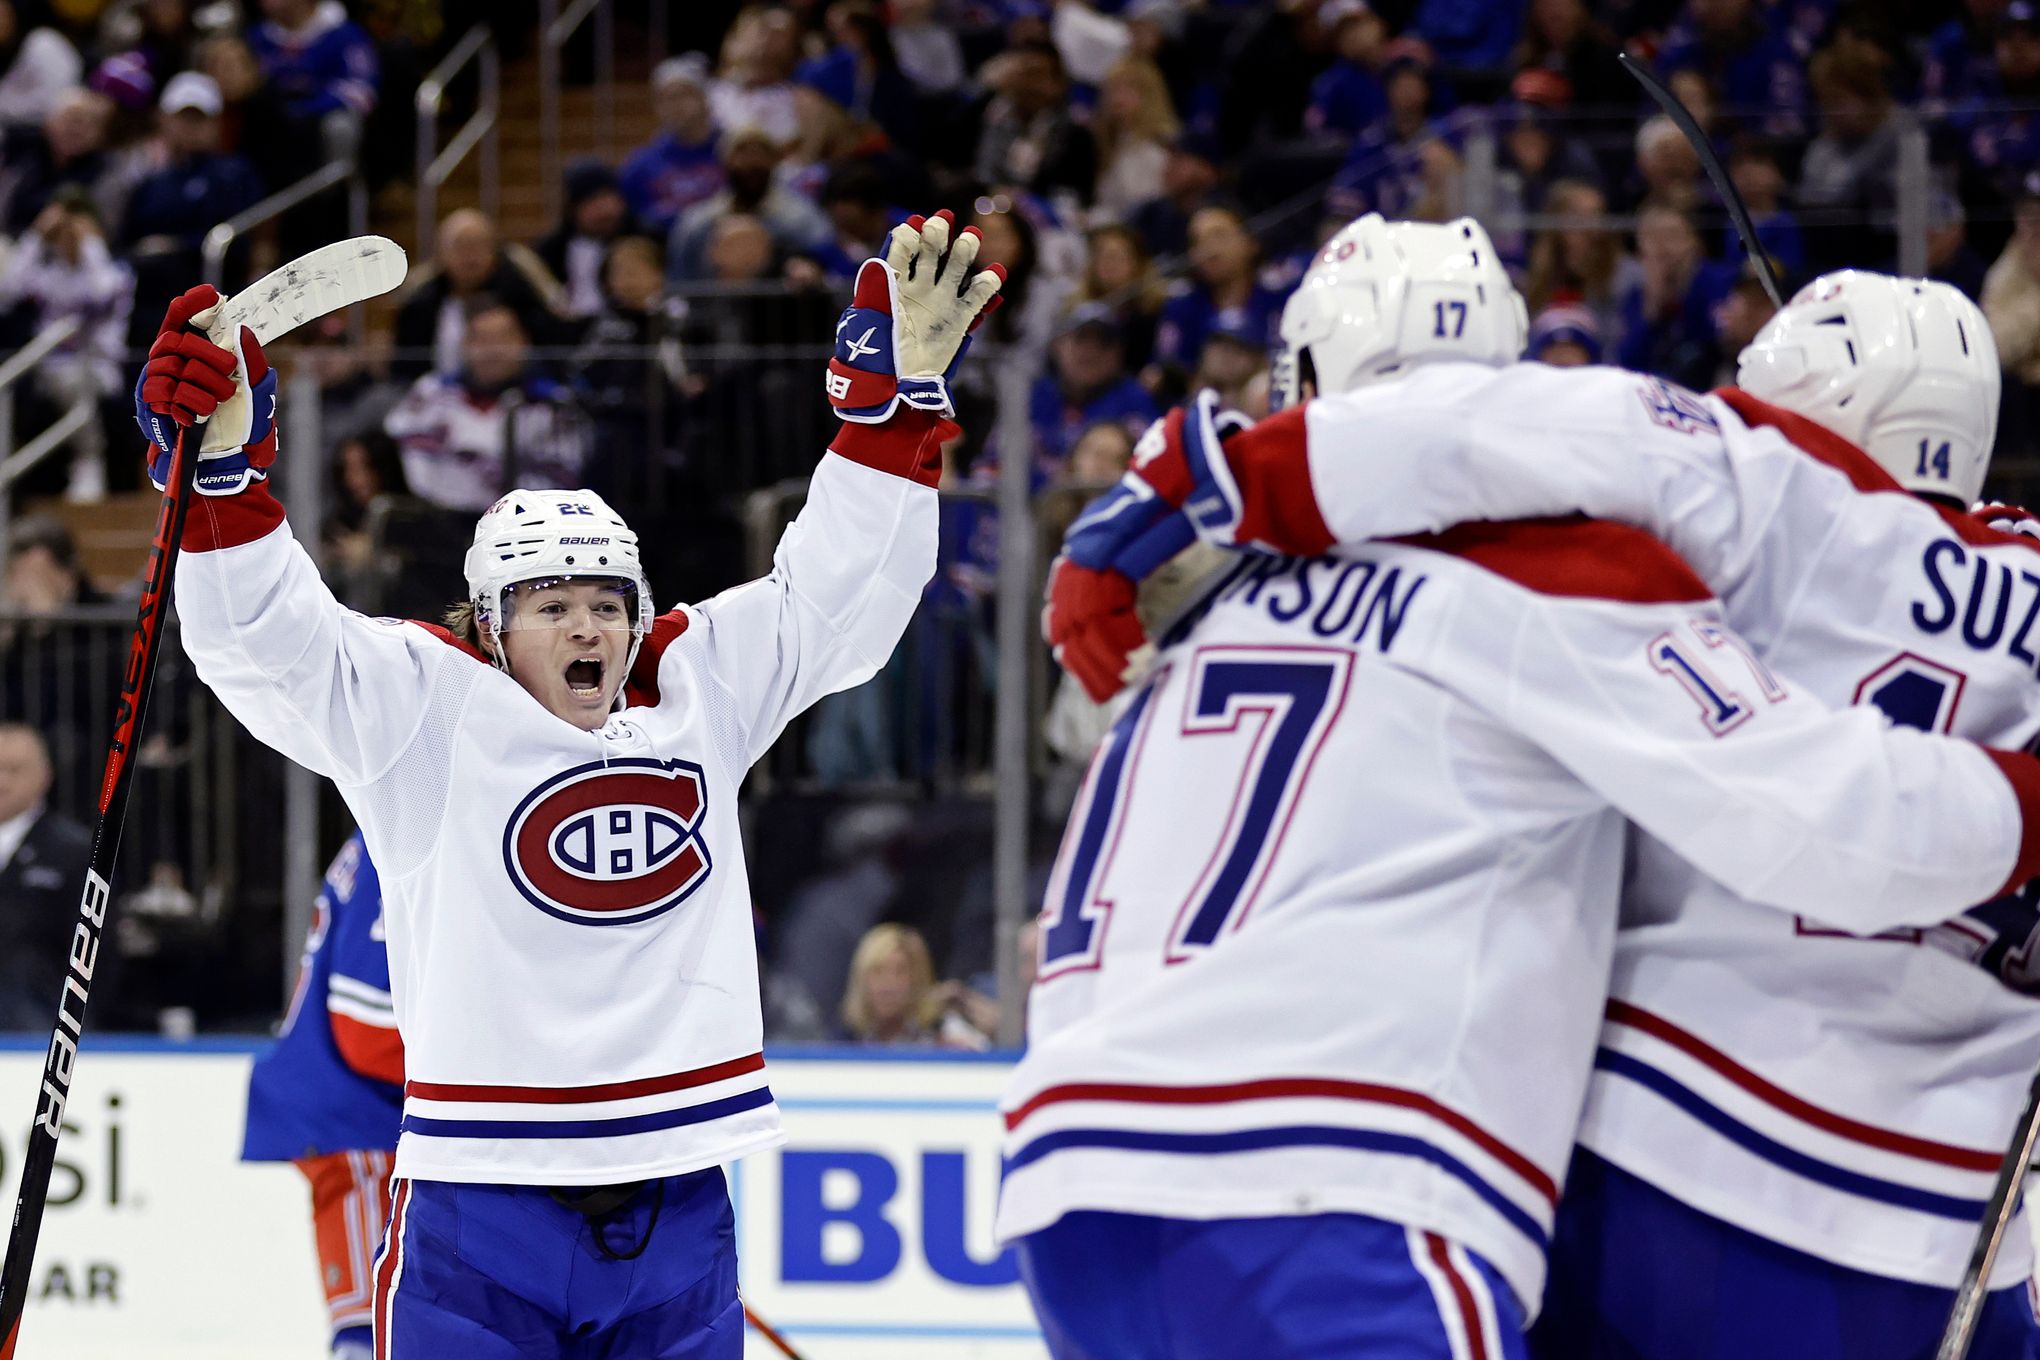 Game 1: Rangers 7, Canadiens 2  post-game notes